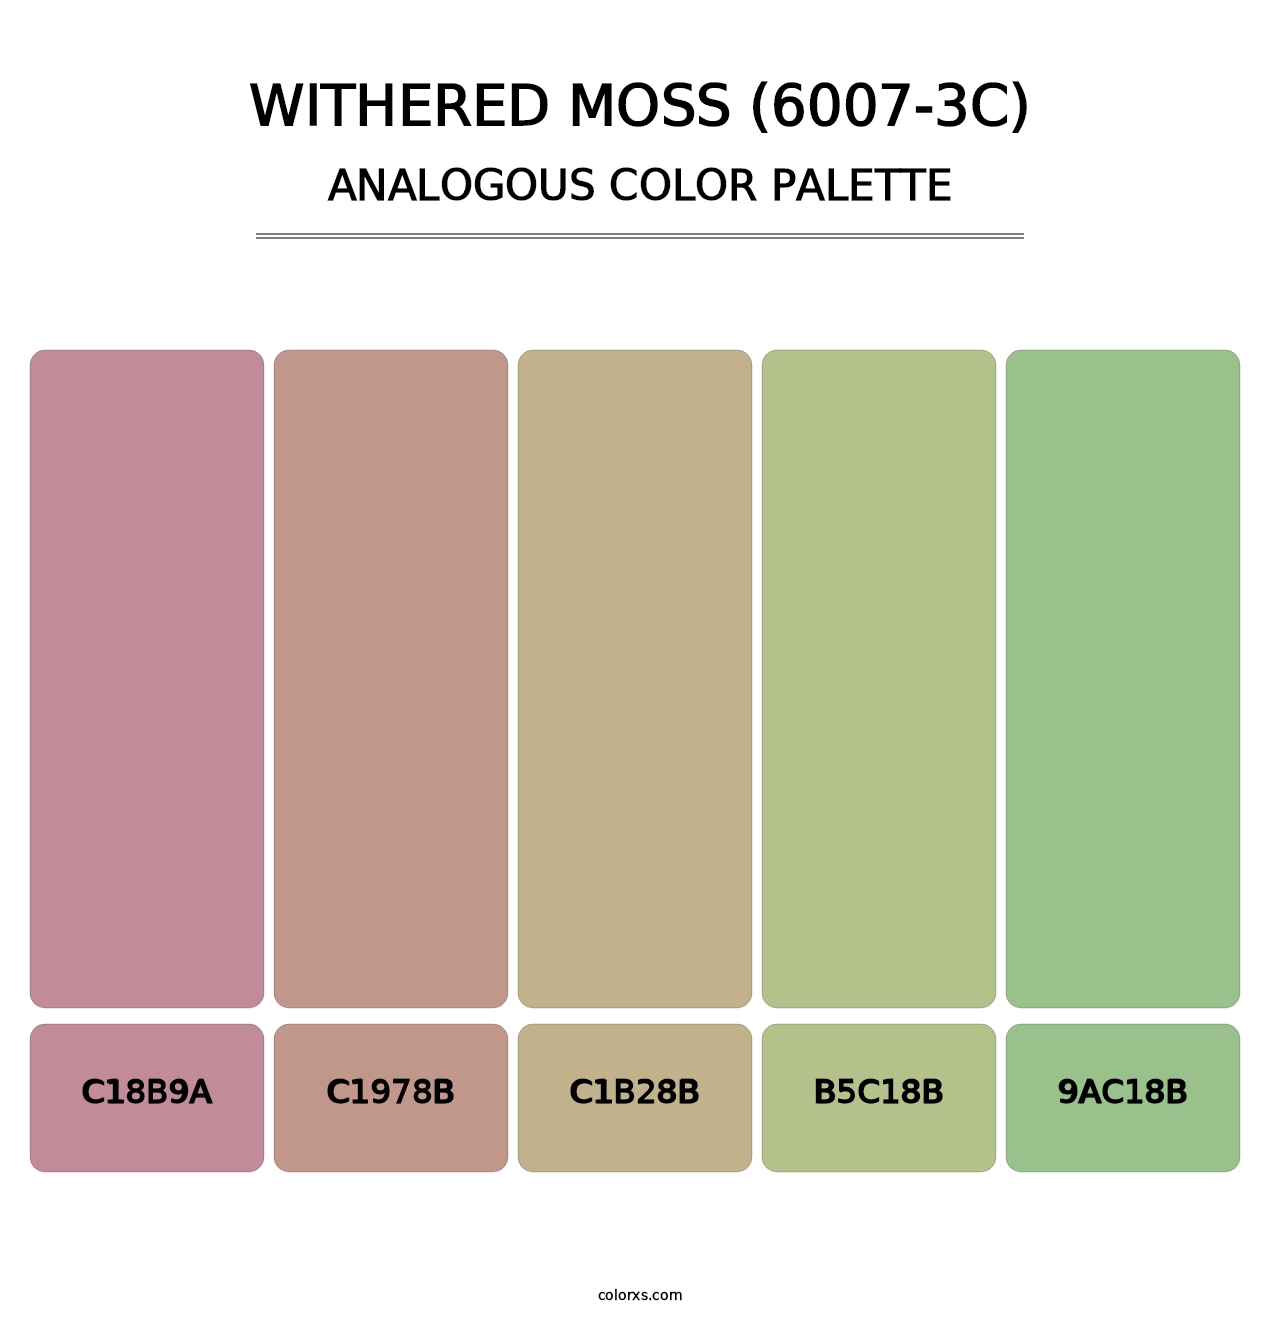 Withered Moss (6007-3C) - Analogous Color Palette